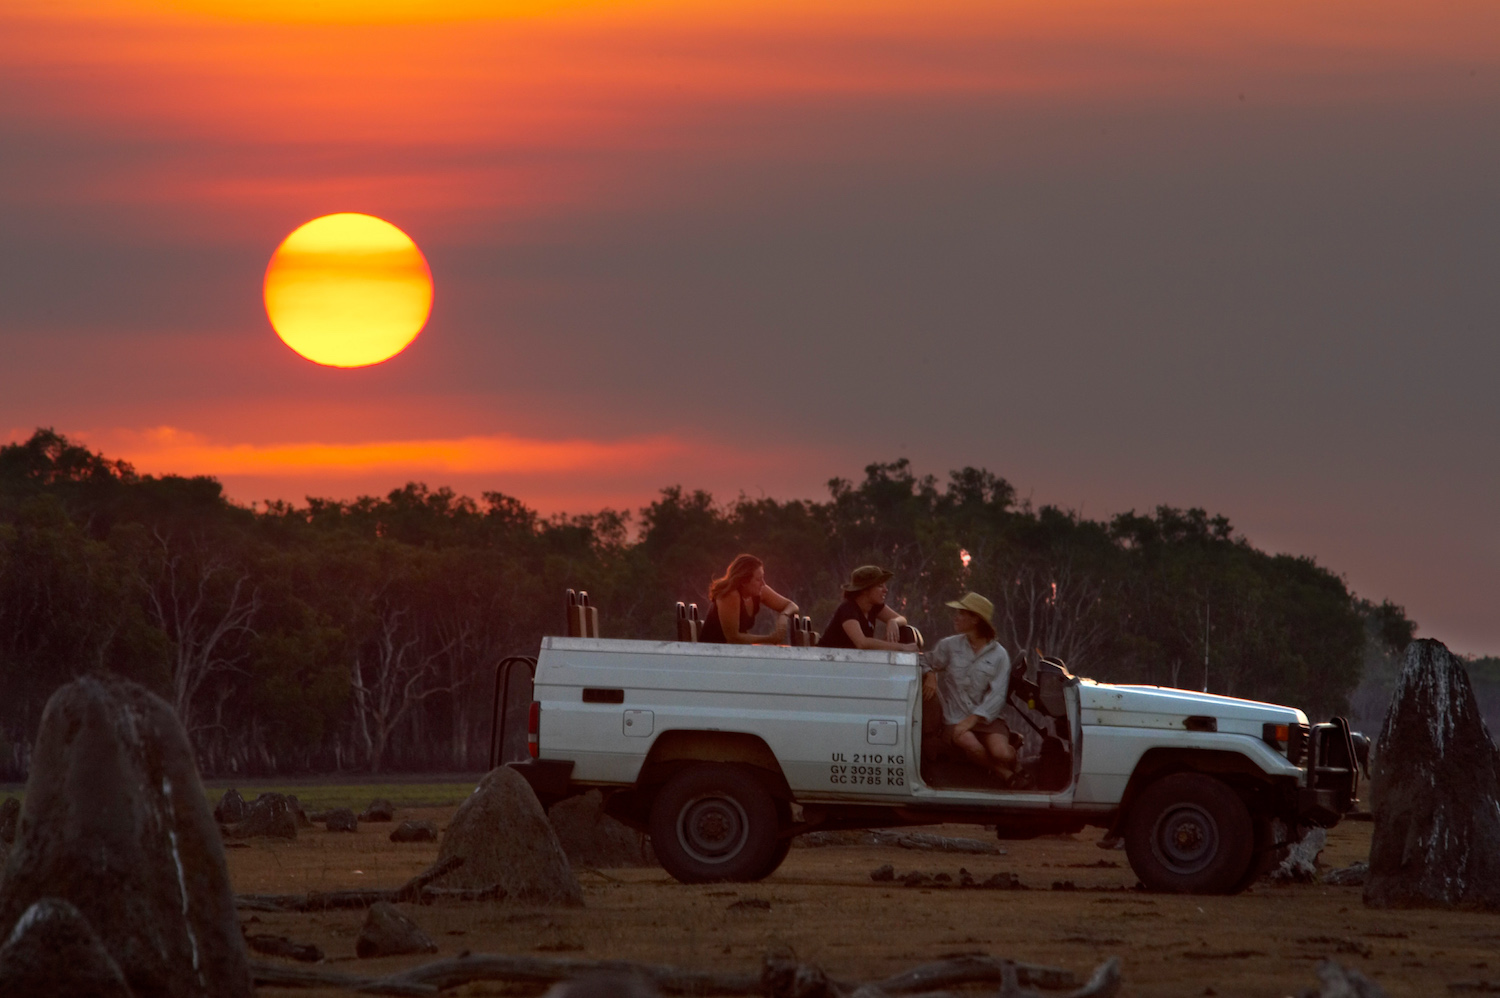 One of the unique and exclusive Australian experiences is a sunset game drive at Bamurru Plains